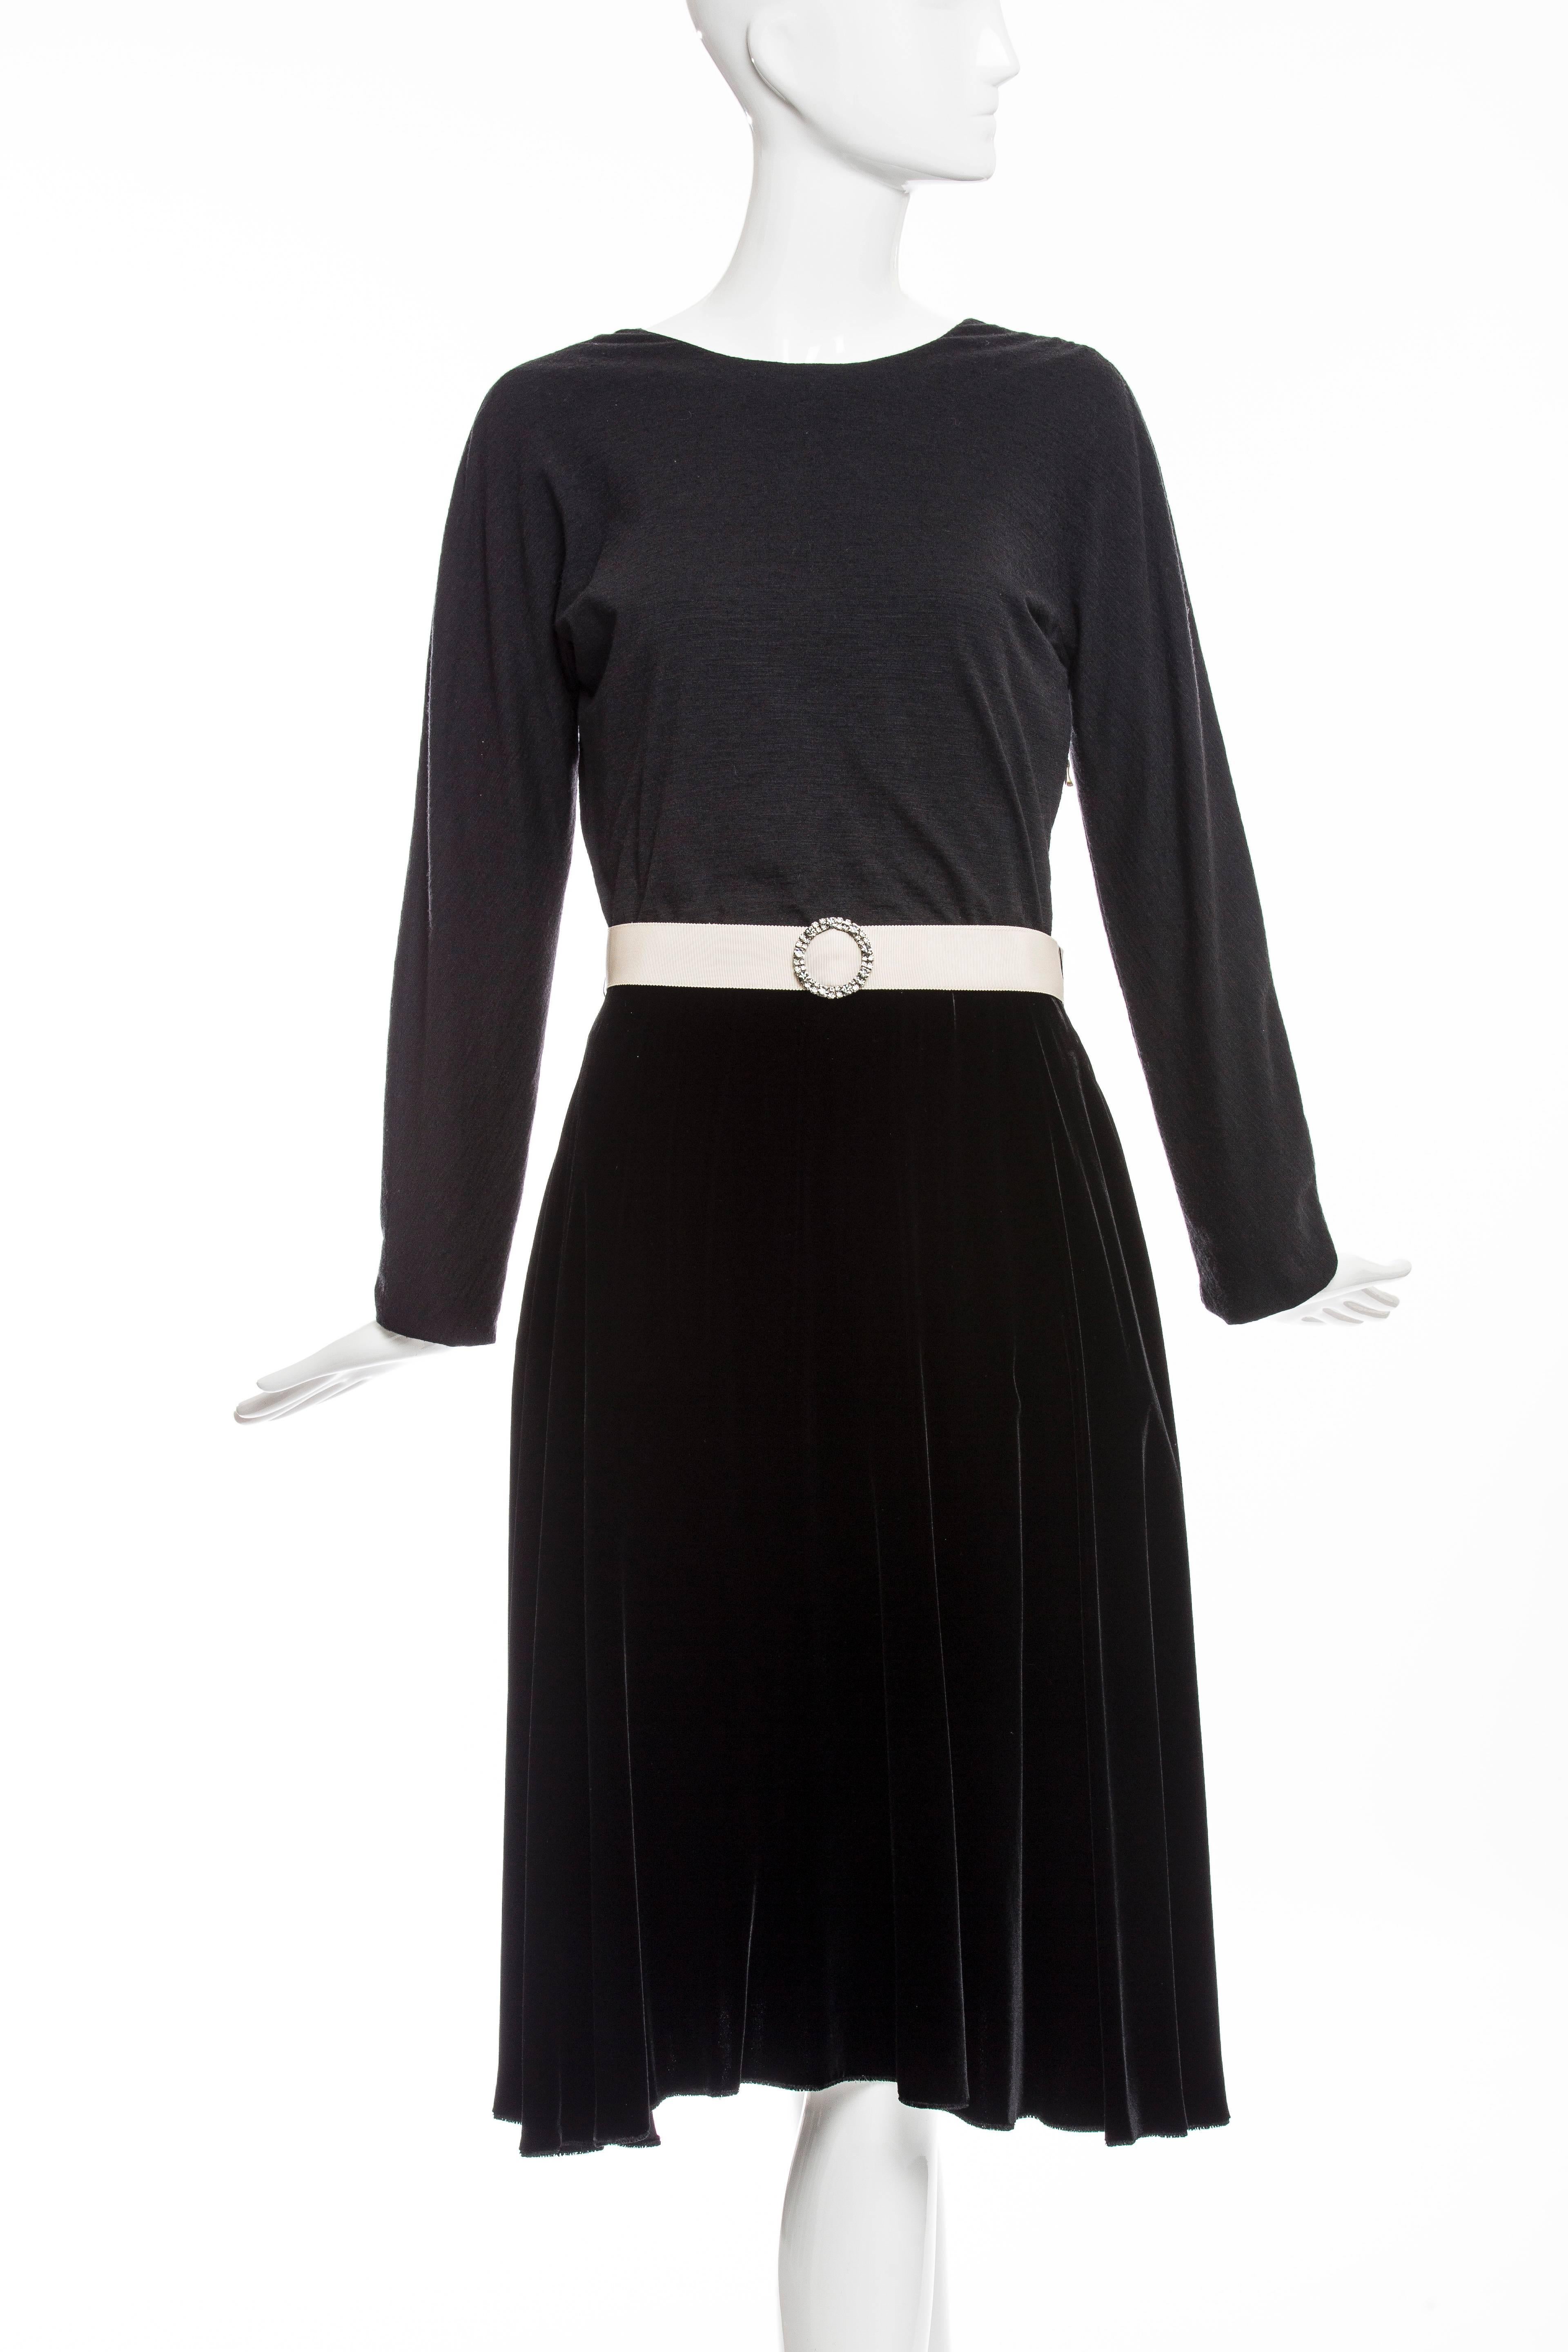 Lanvin, Fall 2006 dress, black silk velvet circular skirt with wool jersey bodice, scoop back, side zip with grosgrain ribbon belt and embellished buckle.

US. 6